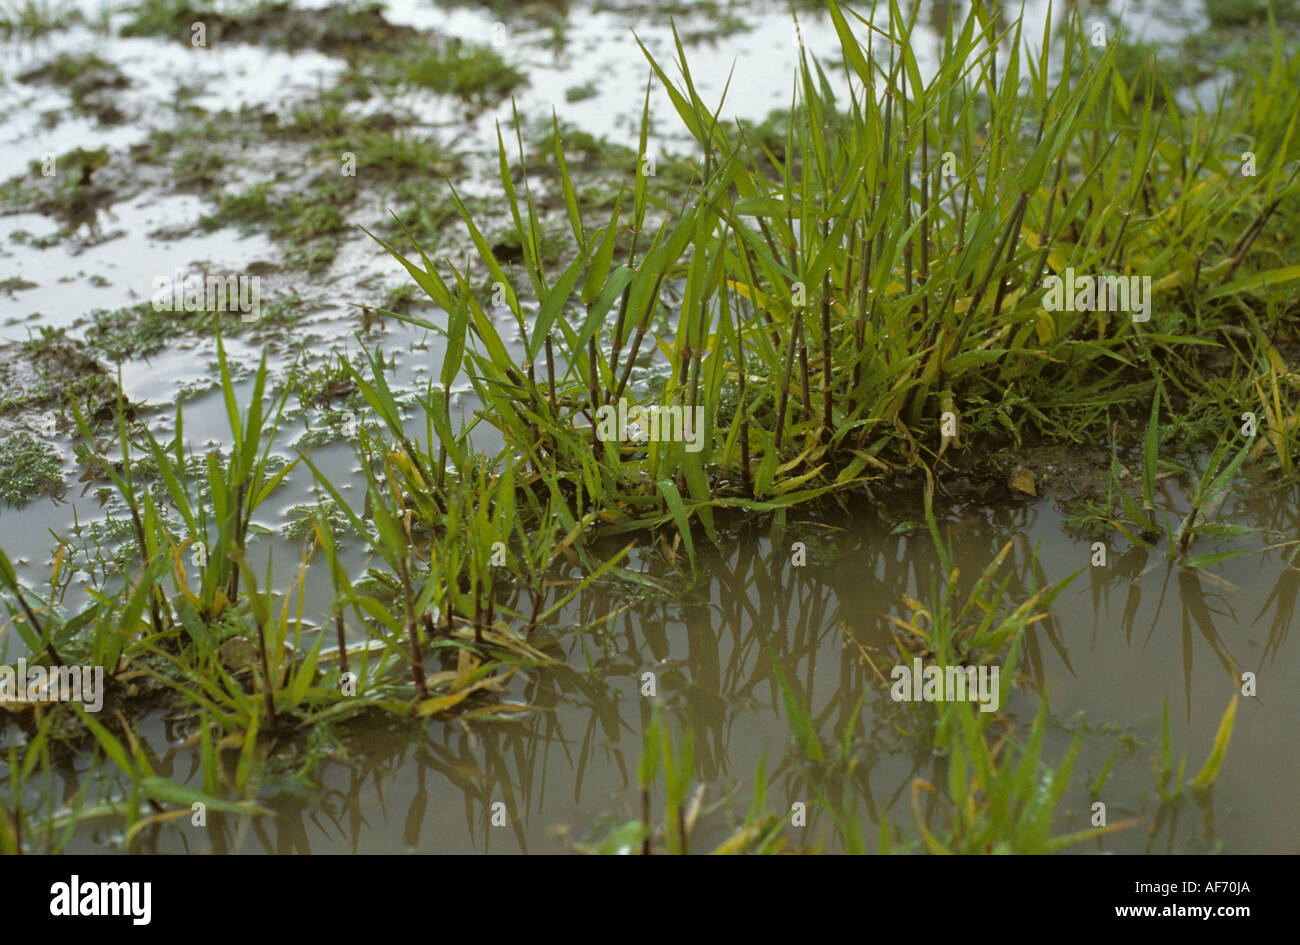 Young barley plants and weeds standing in water after heavy rain Stock Photo